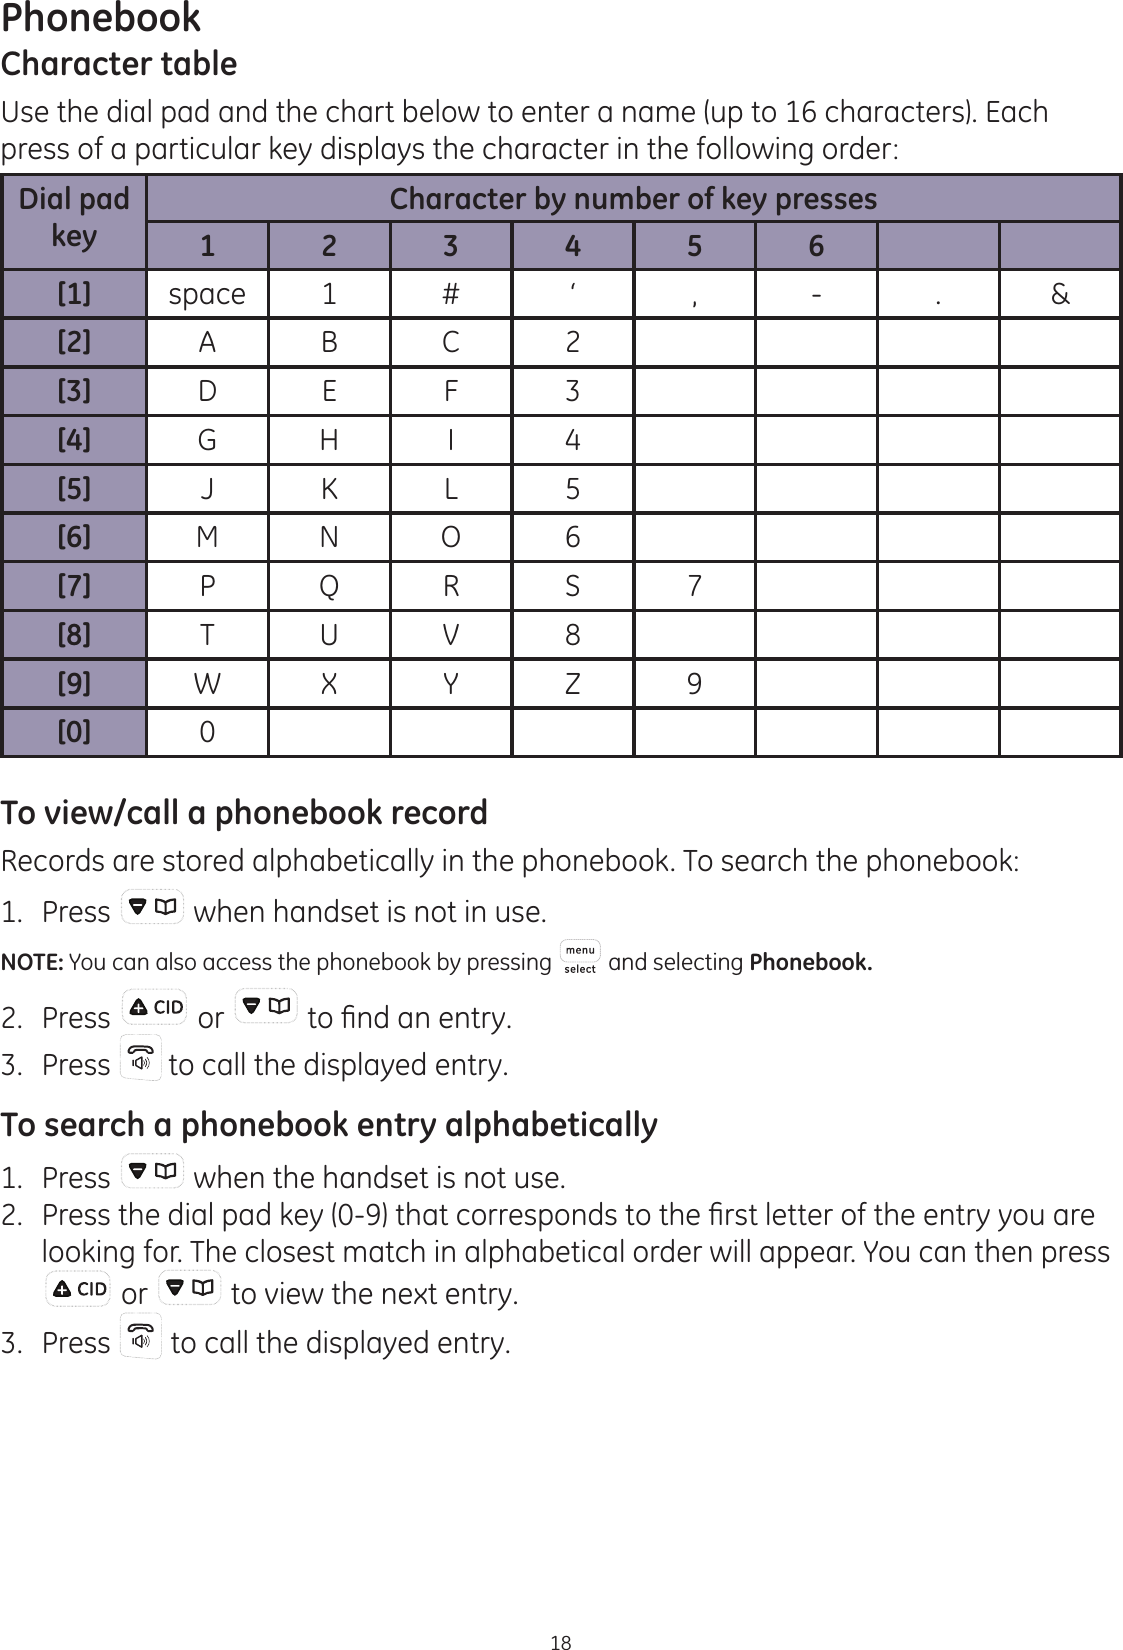 Phonebook18Character tableUse the dial pad and the chart below to enter a name (up to 16 characters). Each press of a particular key displays the character in the following order:Dial pad keyCharacter by number of key presses123456[1] space 1 # ‘ , - . &amp;[2] A B C 2[3] D E F 3[4] G H I 4[5] J K L 5[6] M N O 6[7] P Q R S 7[8] T U V 8[9] W X Y Z 9[0] 0To view/call a phonebook recordRecords are stored alphabetically in the phonebook. To search the phonebook:1.  Press   when handset is not in use.NOTE: You can also access the phonebook by pressing   and selecting Phonebook.2.  Press   or  WR¿QGDQHQWU\3.  Press   to call the displayed entry. To search a phonebook entry alphabetically1.  Press   when the handset is not use. 3UHVVWKHGLDOSDGNH\WKDWFRUUHVSRQGVWRWKH¿UVWOHWWHURIWKHHQWU\\RXDUHlooking for. The closest match in alphabetical order will appear. You can then press  or   to view the next entry.3.  Press   to call the displayed entry.